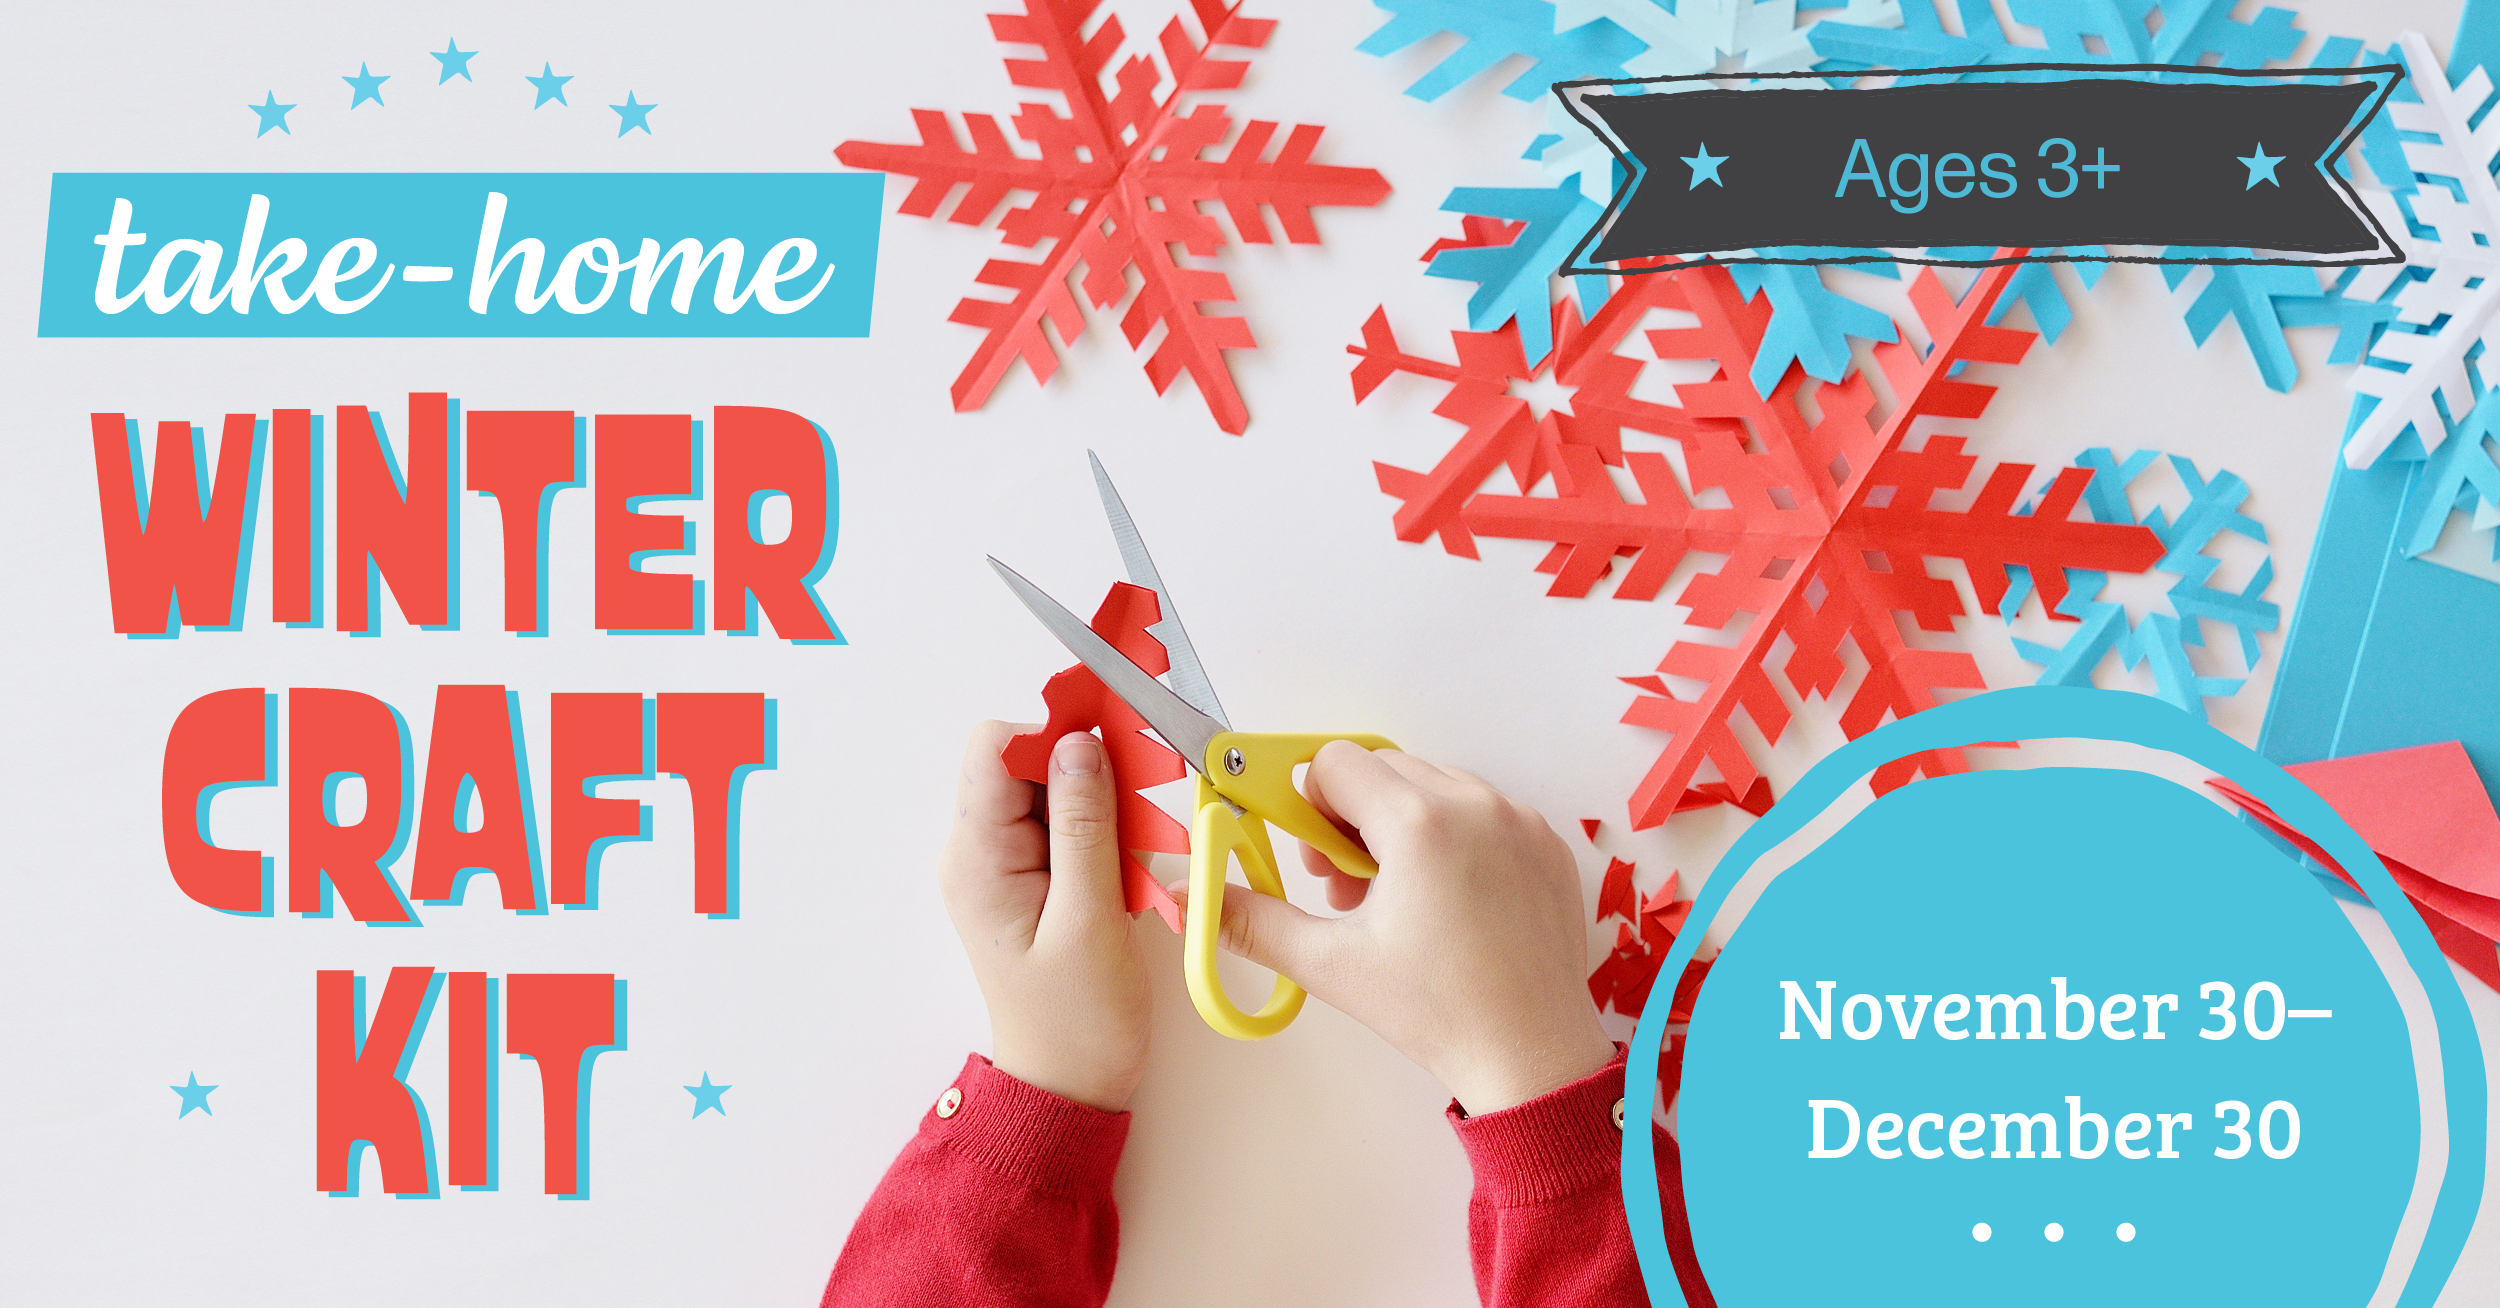 Winter Craft Kit with paper snowflakes Ages 3+ November 30 to December 30